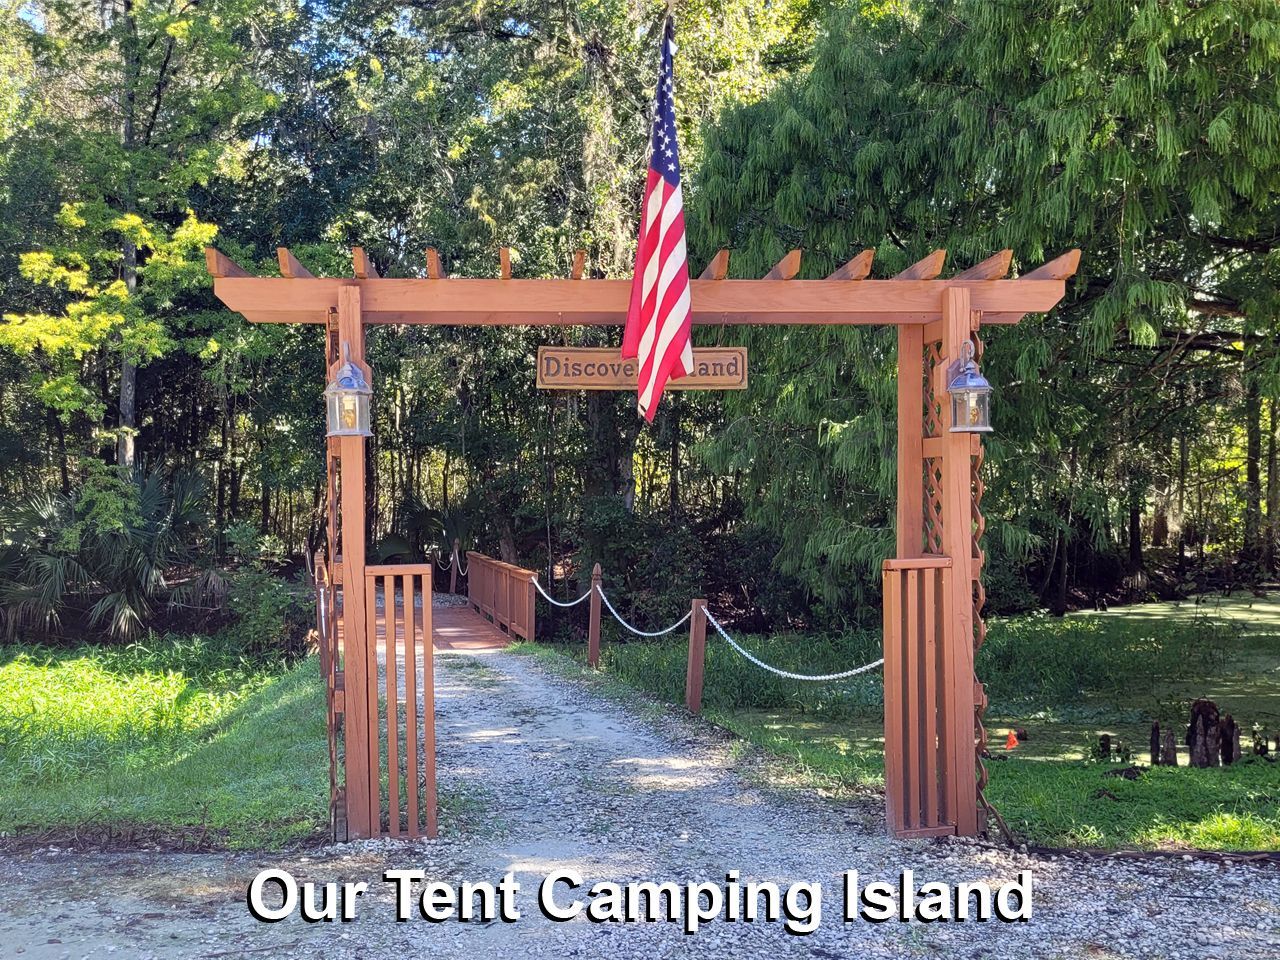 an american flag is flying over a wooden archway leading to our tent camping island .